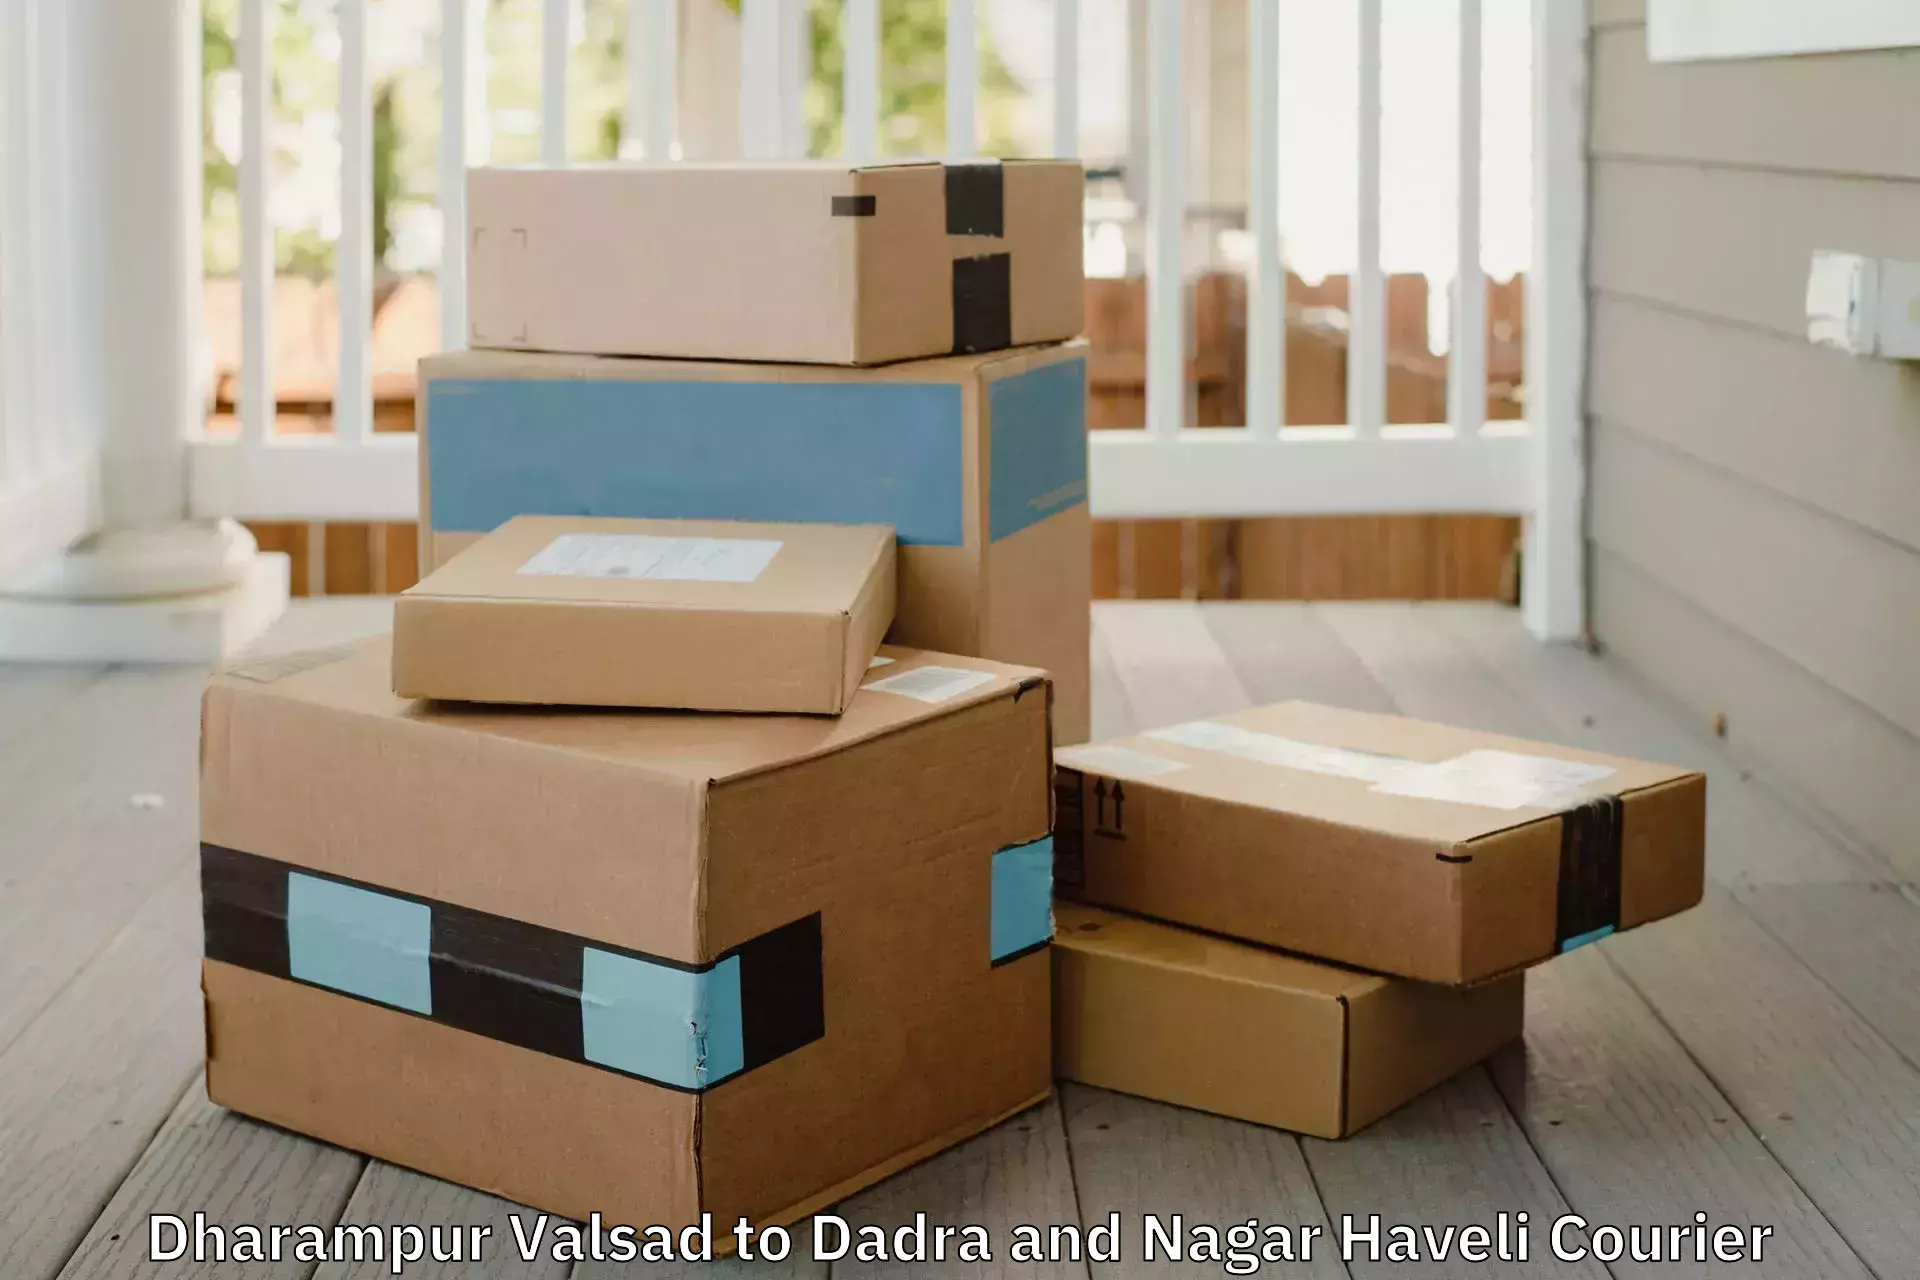 High-quality moving services Dharampur Valsad to Dadra and Nagar Haveli